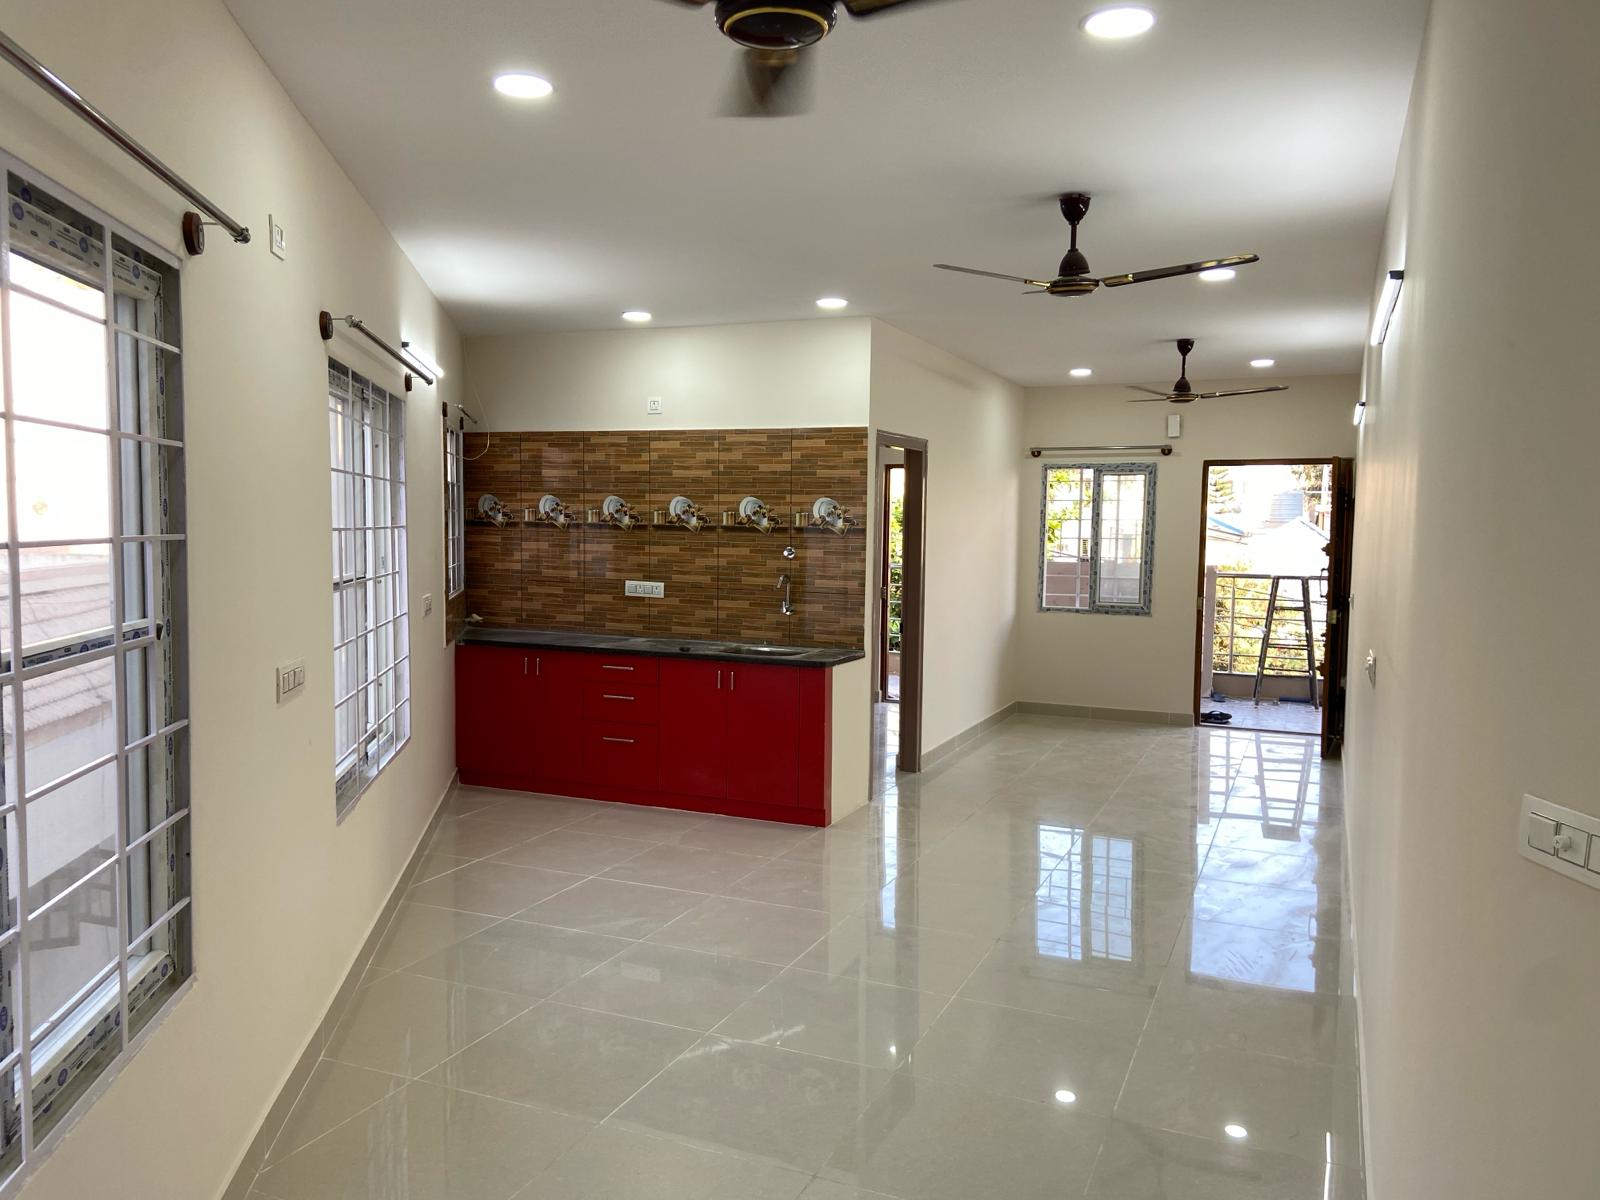 3 BHK Residential Apartment for Lease Only at JAM-6571 in Parappana Agrahara